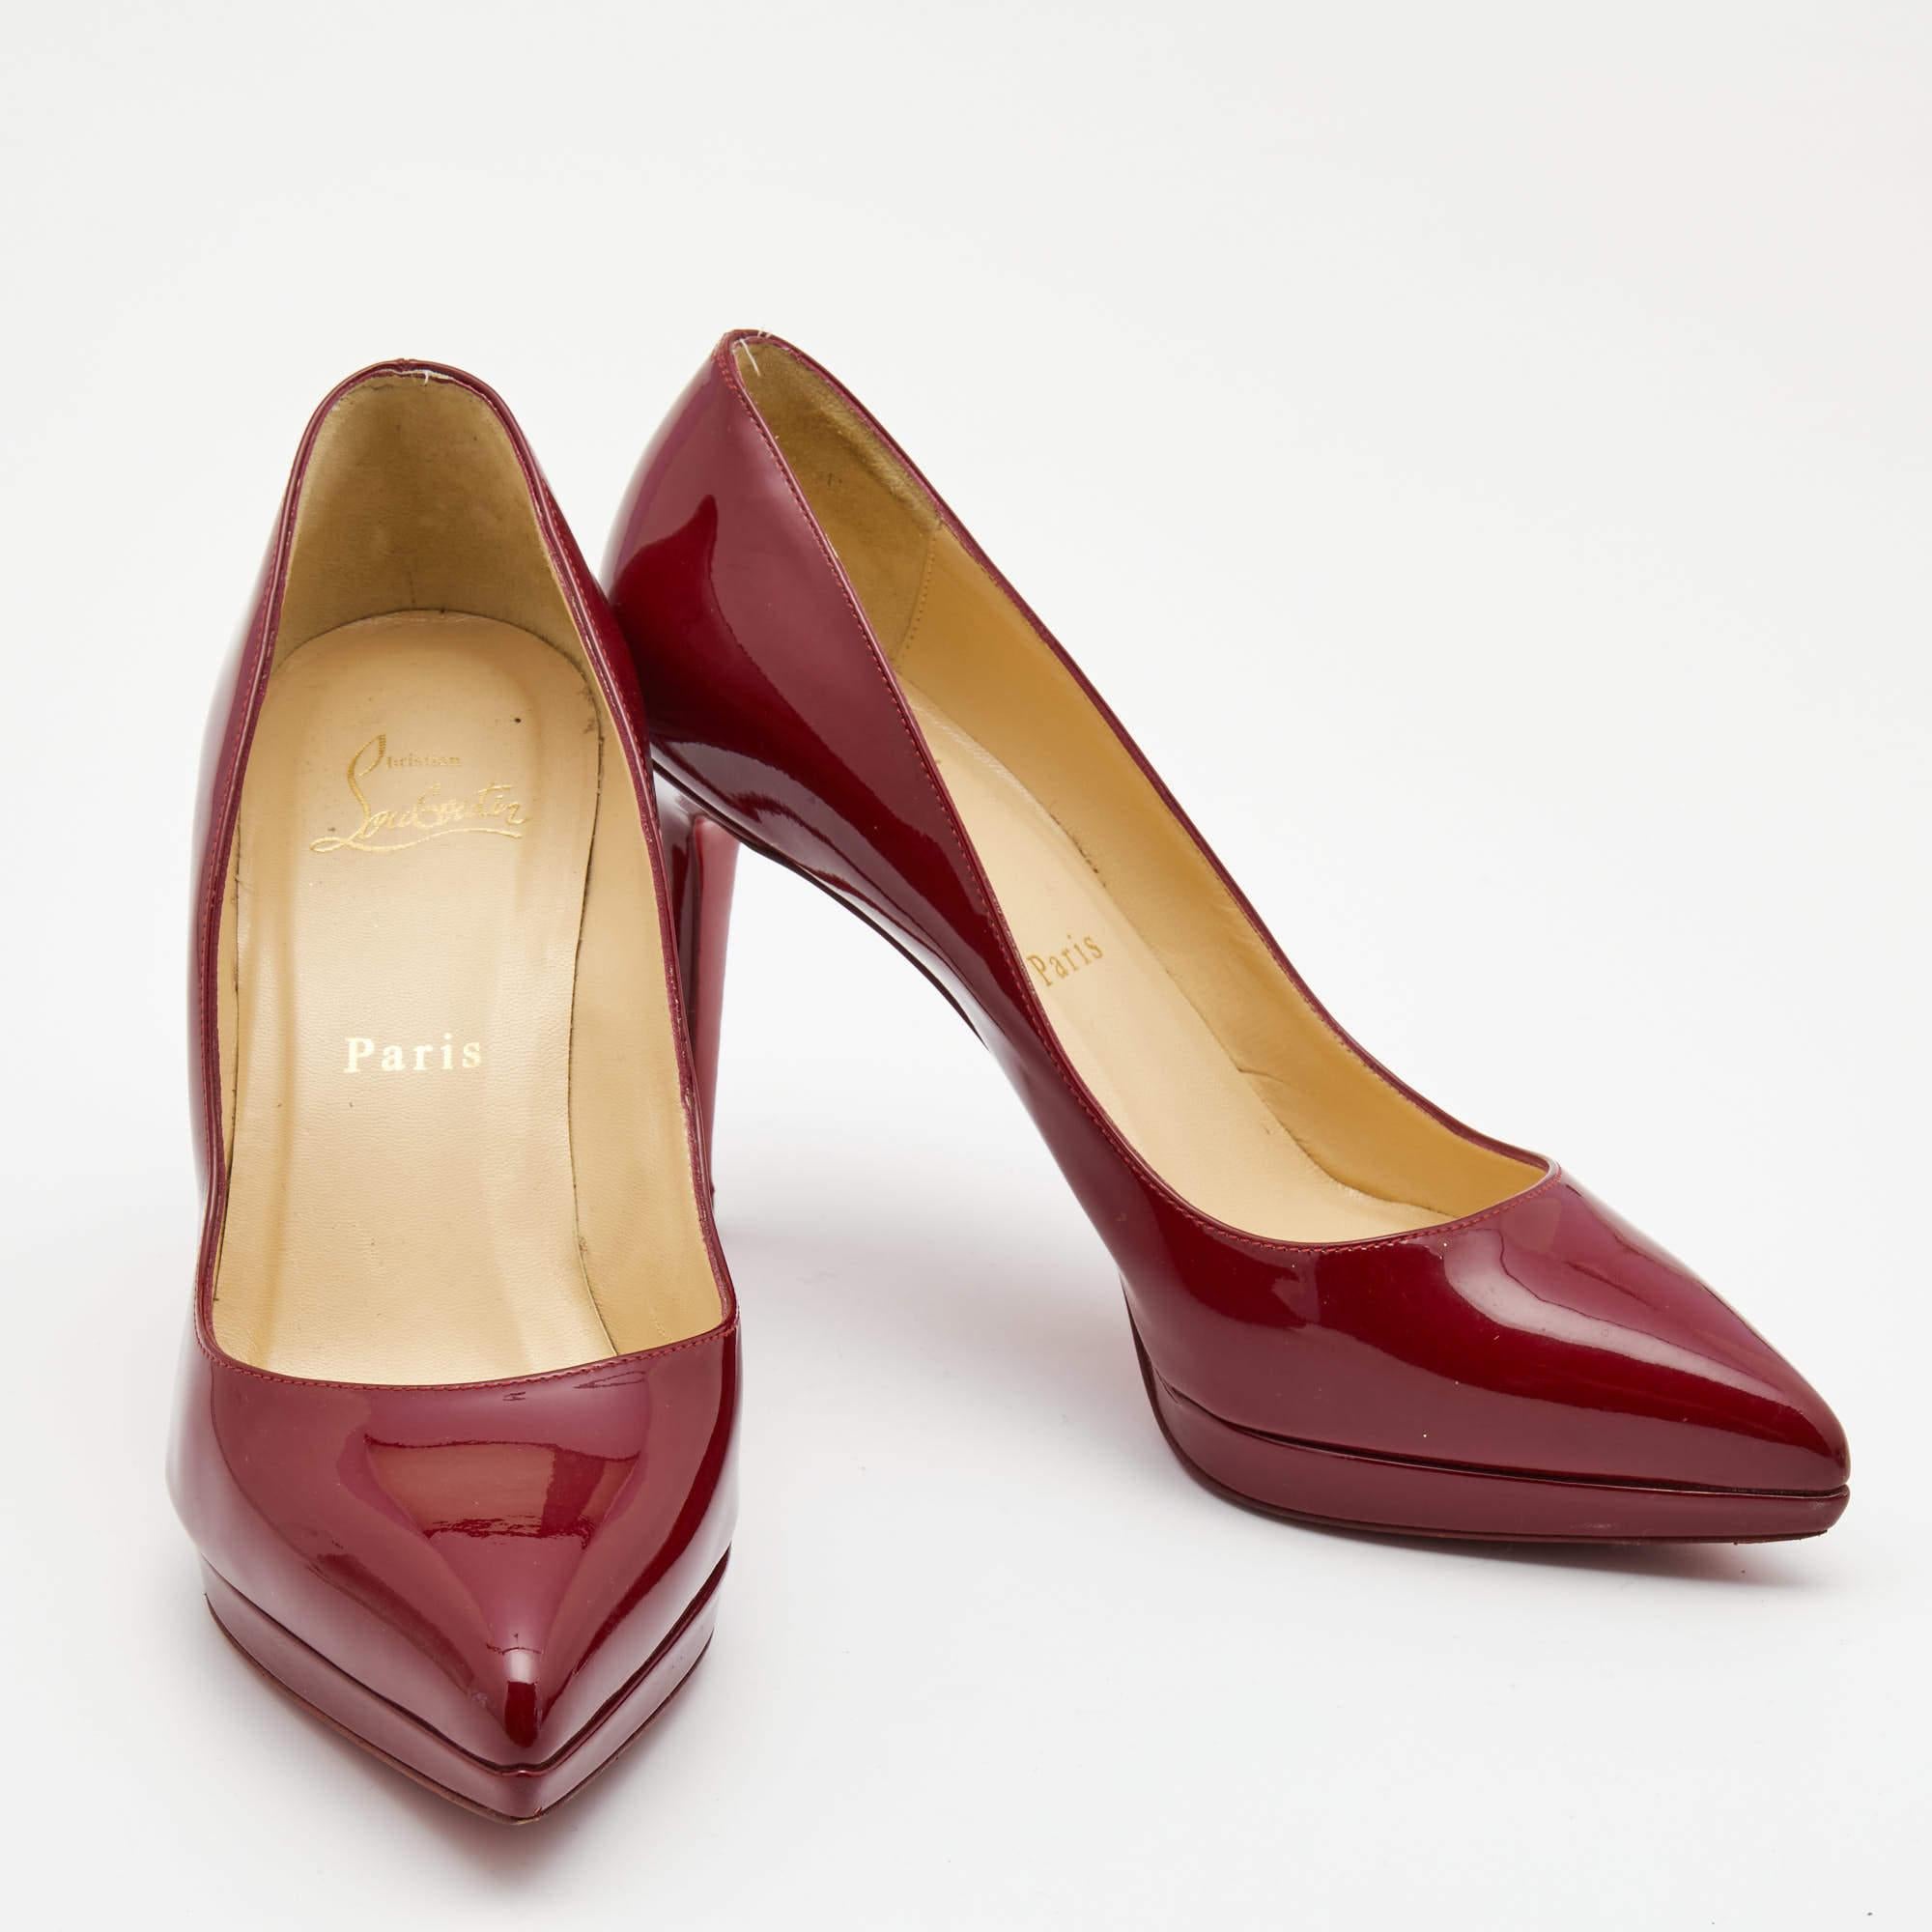 The classic pointed toes and signature red-lacquered sole characterize this pair of Christian Louboutin pumps. Crafted from patent leather, it has been styled with a burgundy exterior and a leather insole. The sleek heels and durable construction